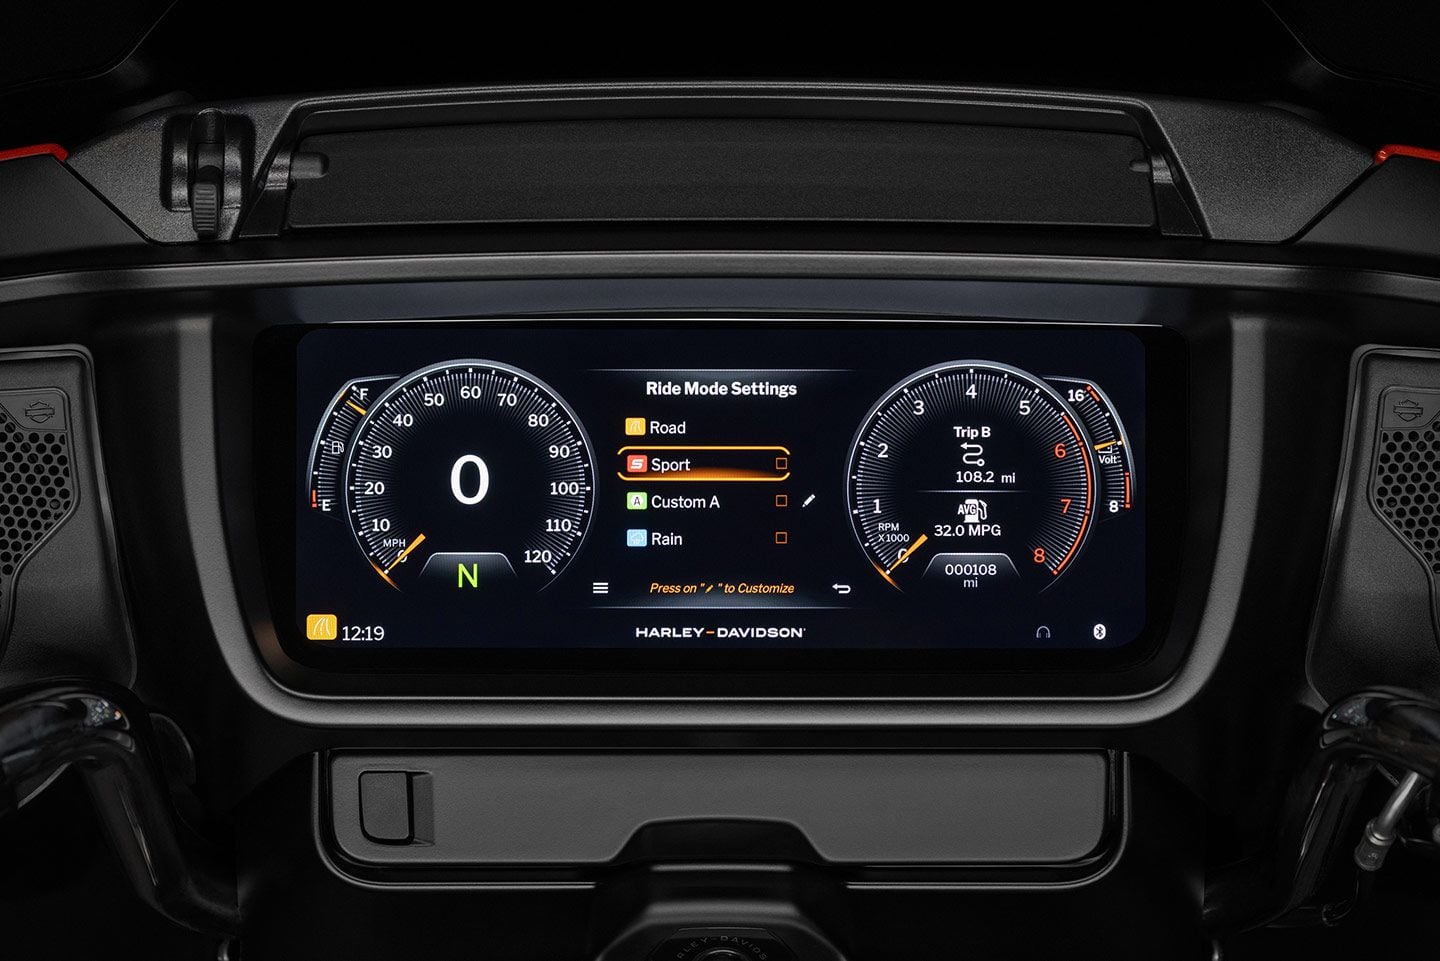 A 12.3-inch TFT touchscreen dominates the inside of the fairing and allows access to infotainment as well as performance adjustments.